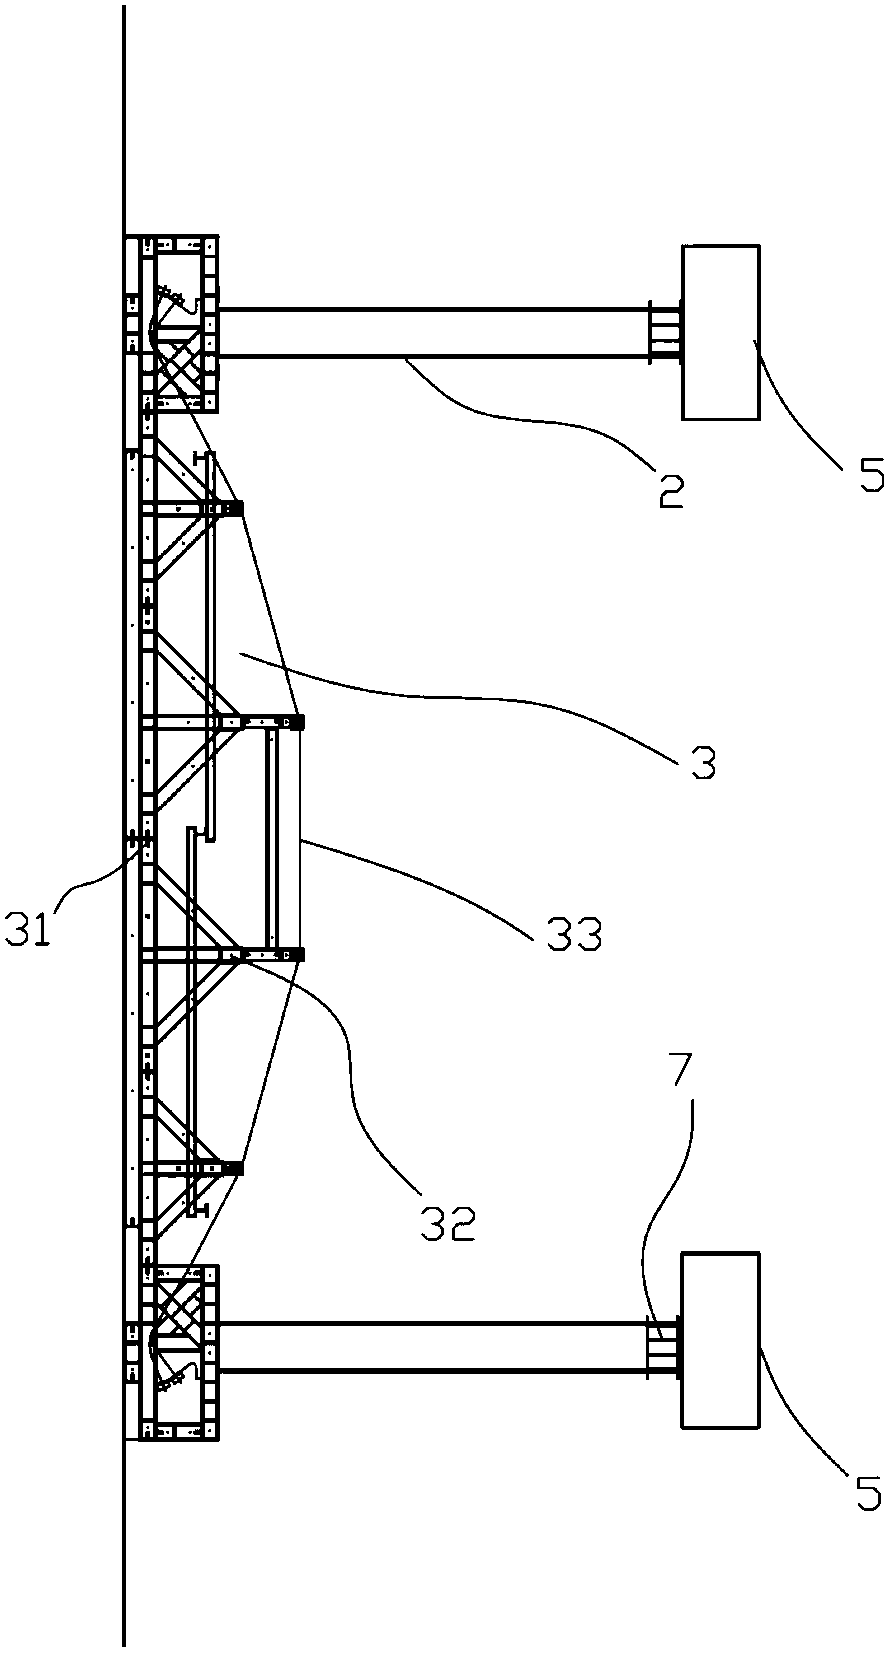 Foundation pit supporting structure with oblique support and pre-stress surrounding purlin